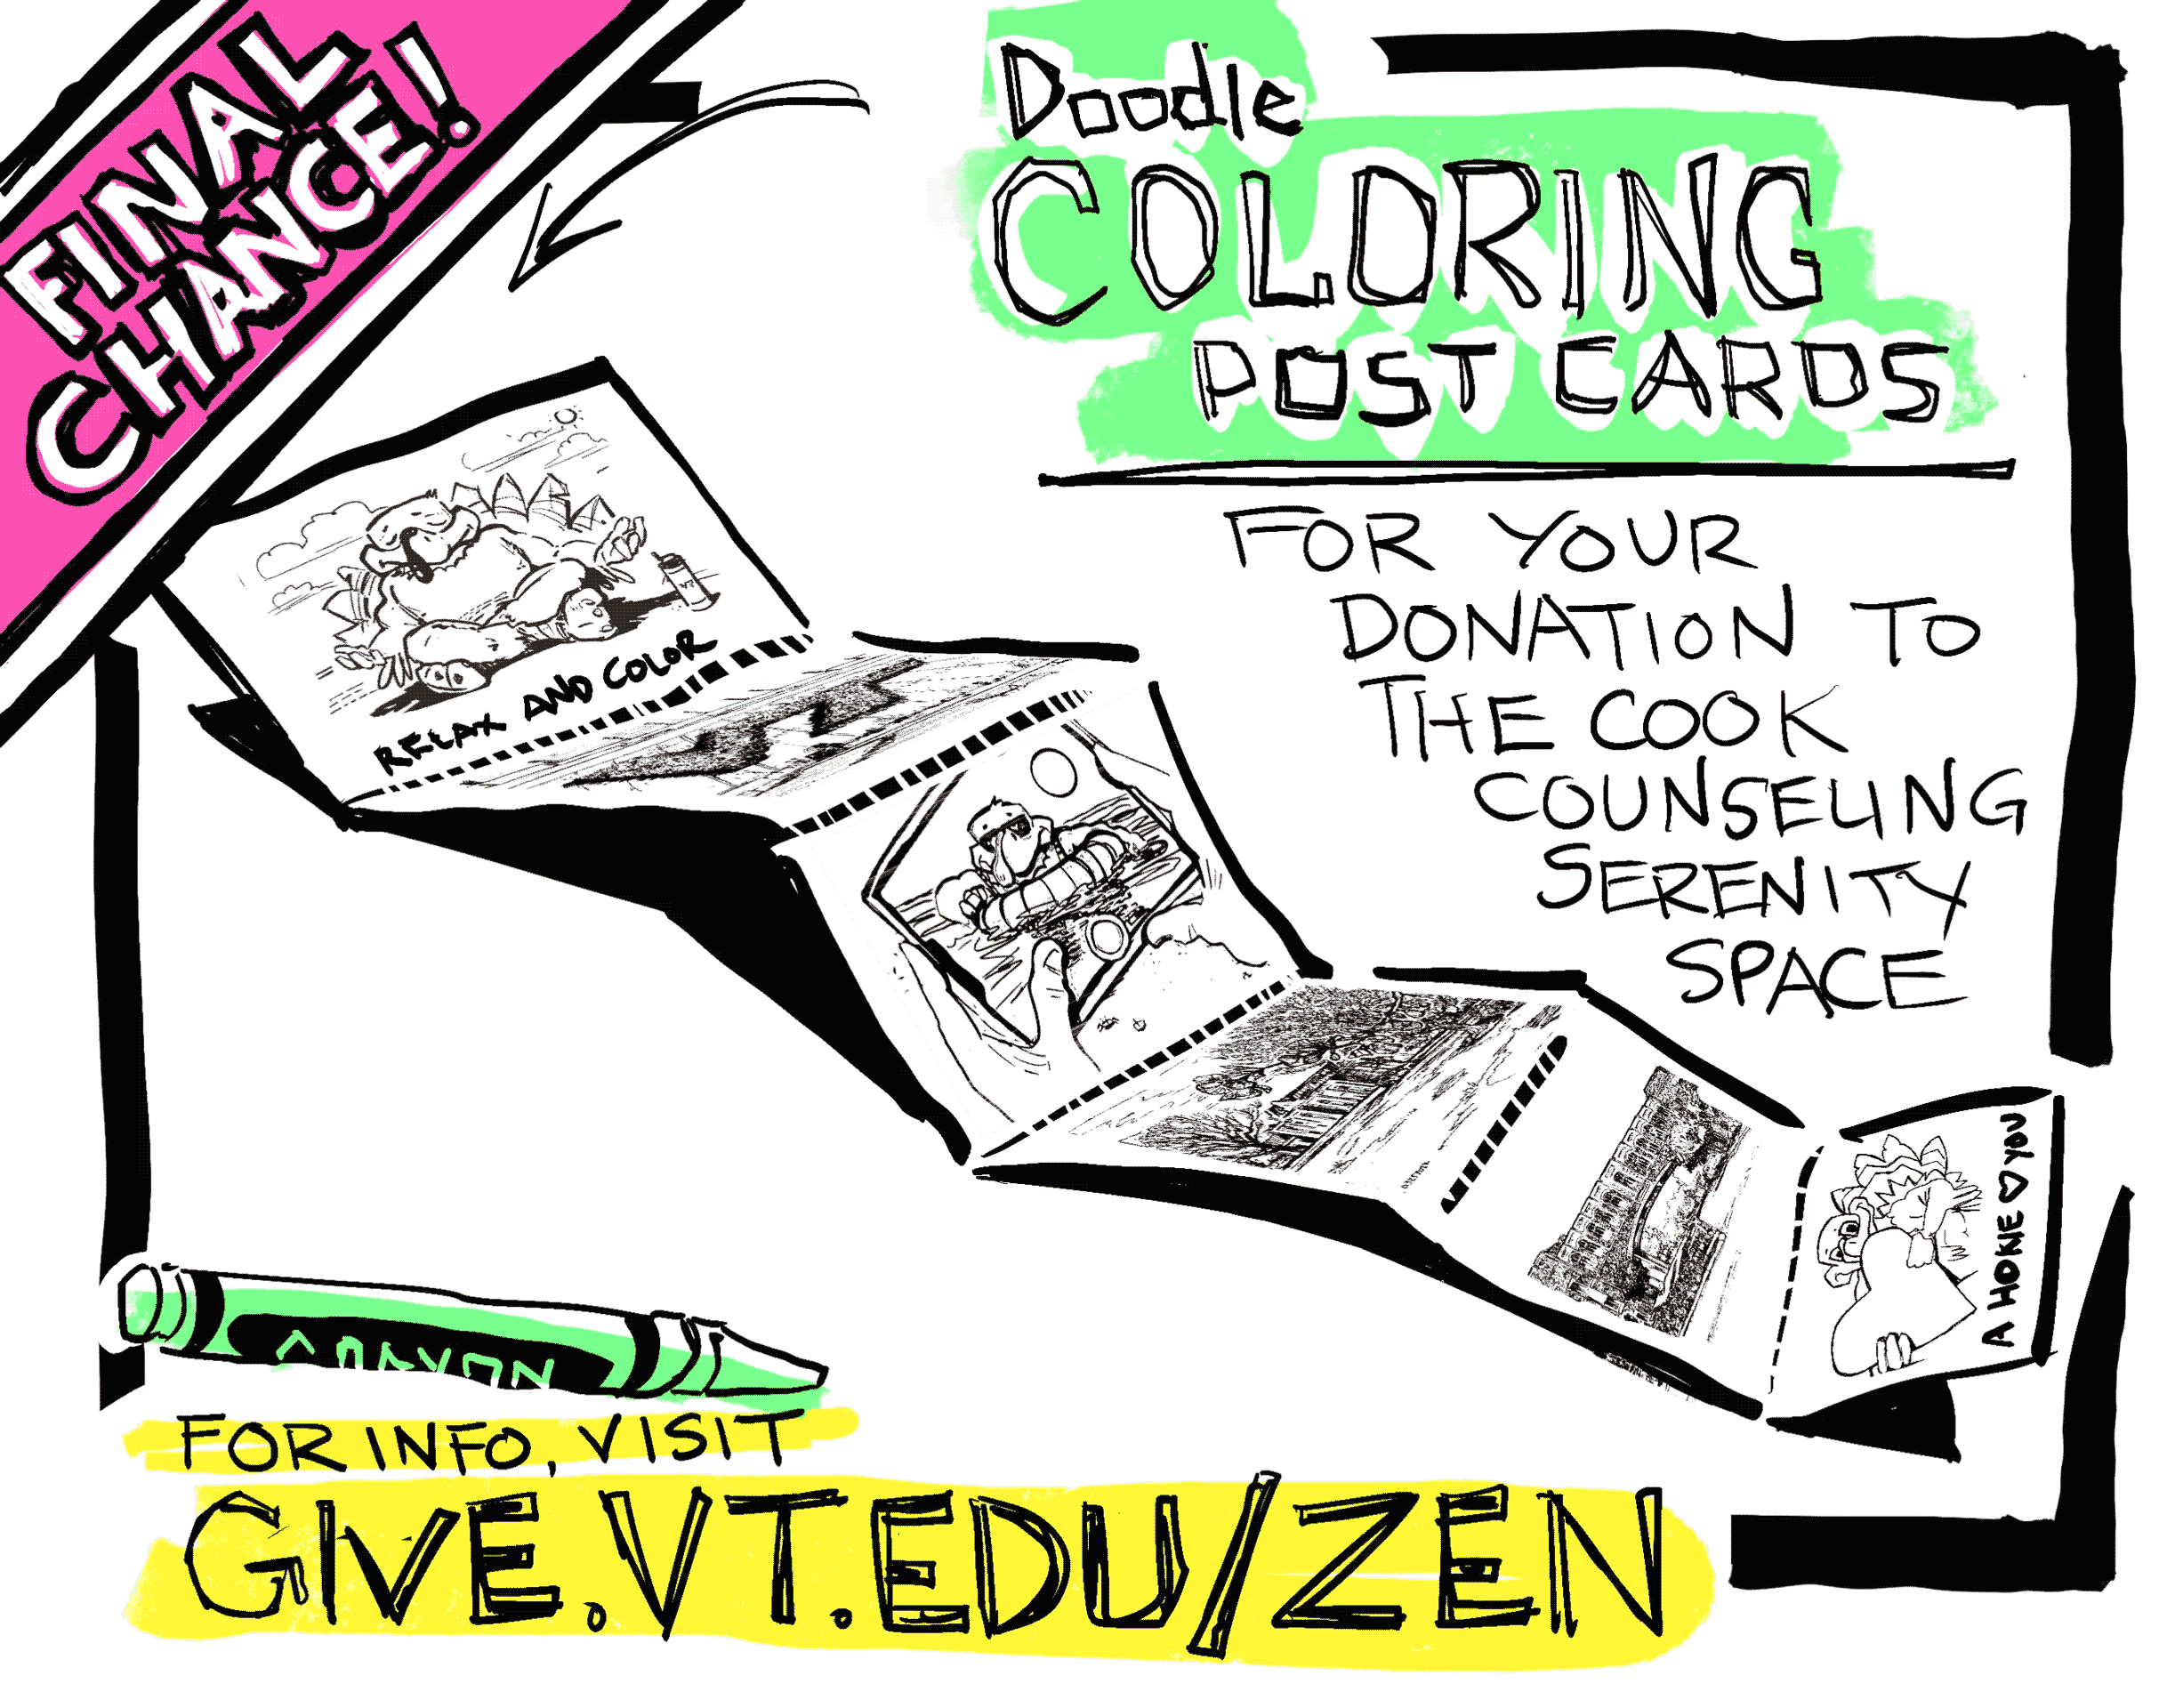 Animated digital sketch of post cards available to donors who support the serenity space campaign with Cook Counseling